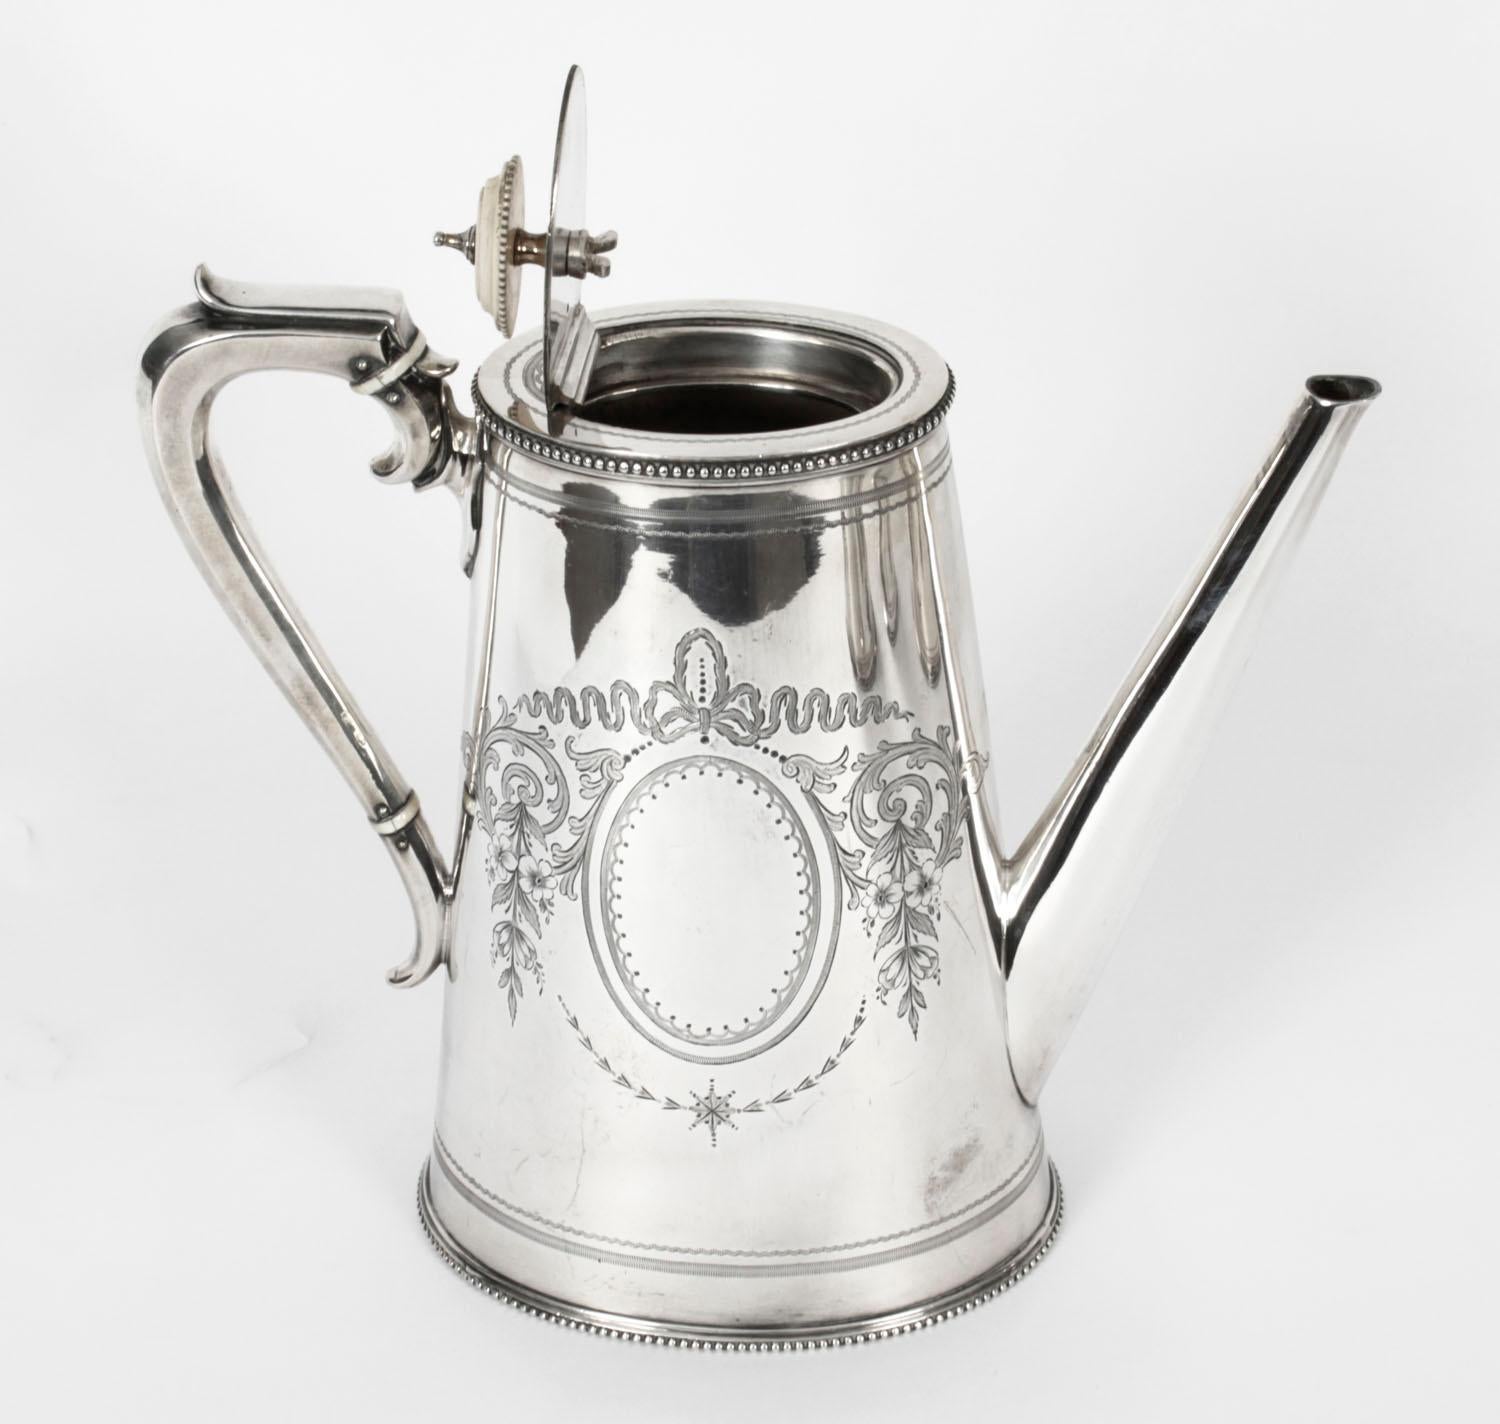 This is an exquisite antique English Victorian silver plated tea and coffee set by the renowned silversmith Elkington & Co and Circa 1860 in date.
 
This splendid set comprises a tea pot, coffee pot, cream jug and sugar bowl, all with superb